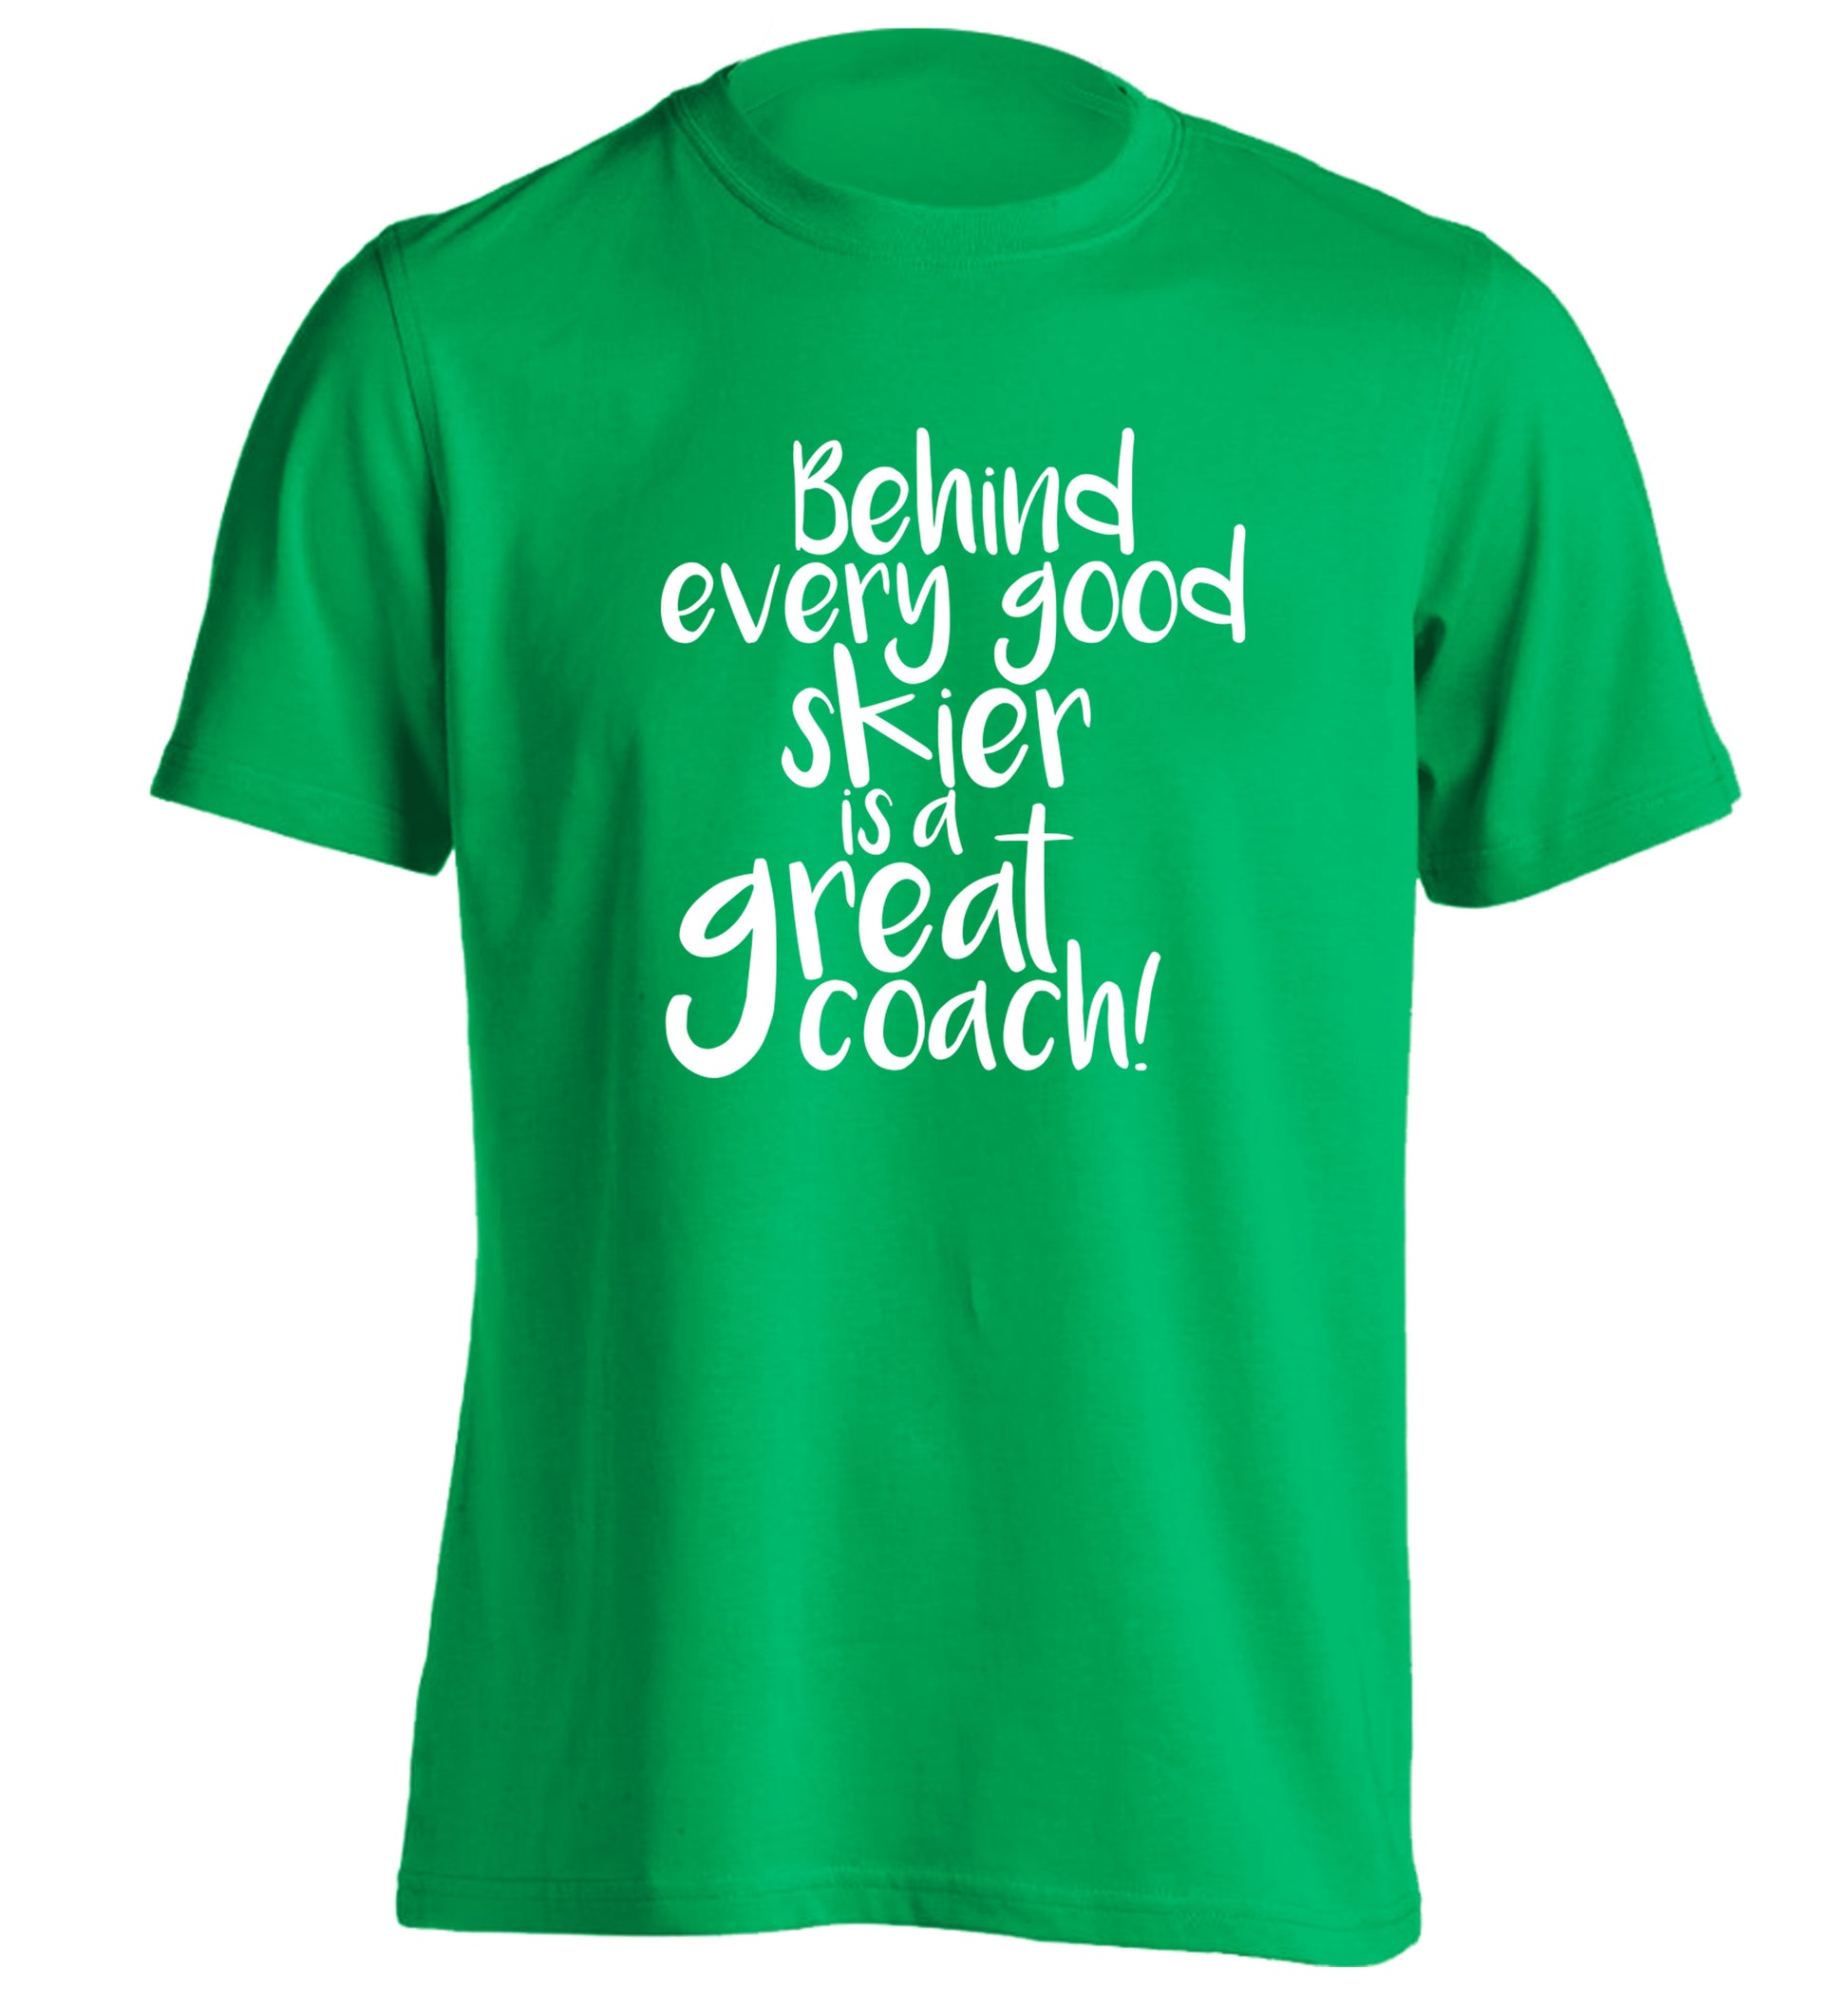 Behind every good skier is a great coach! adults unisexgreen Tshirt 2XL